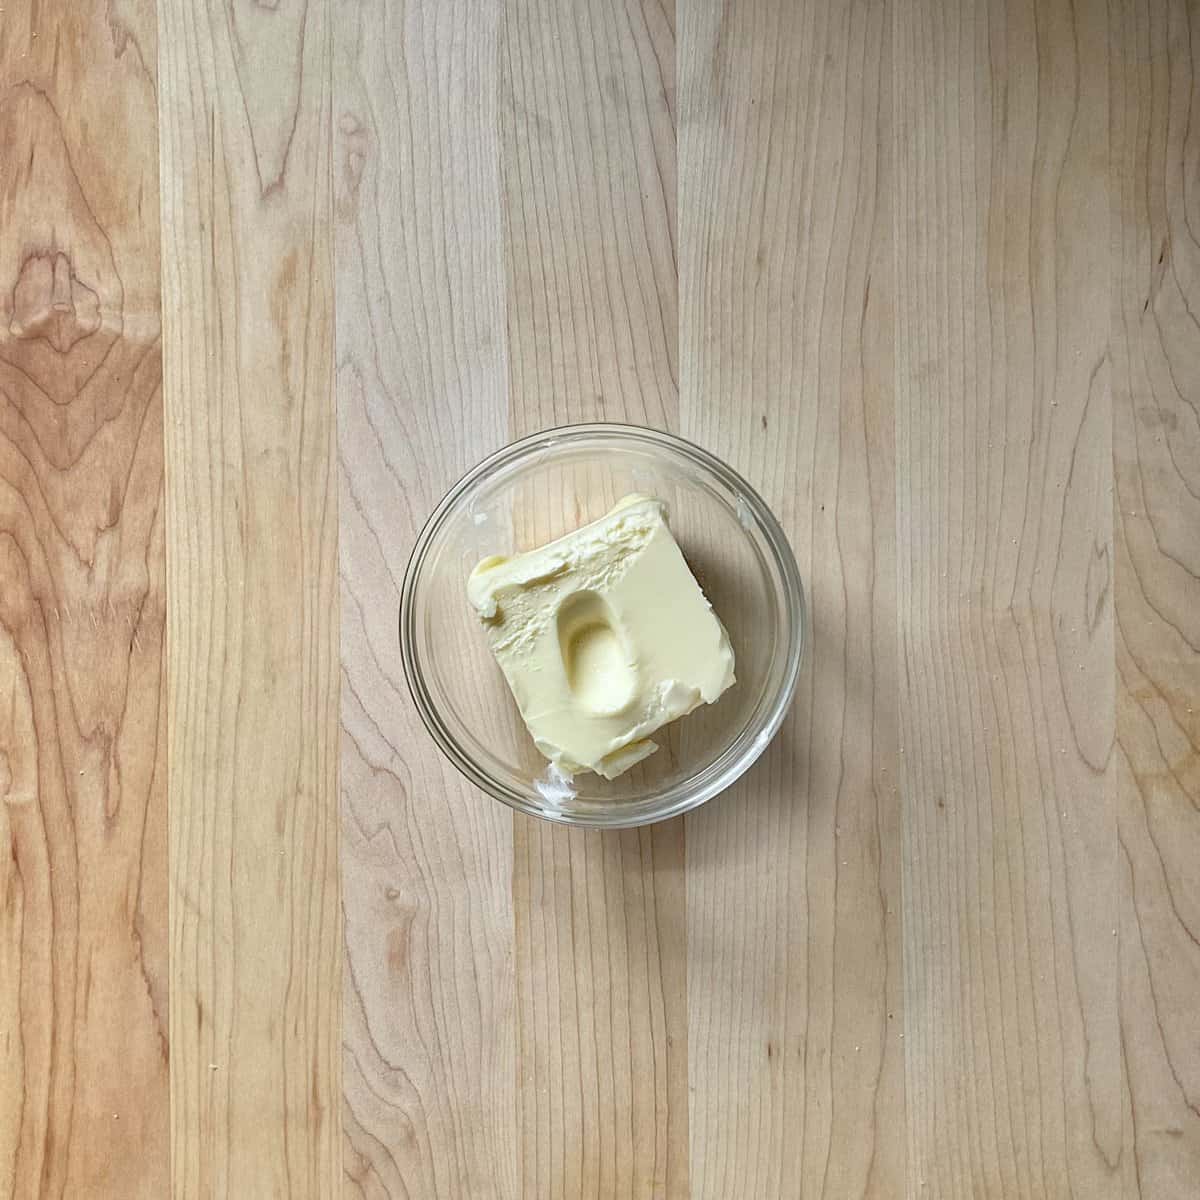 Room temperature butter in a small dish.